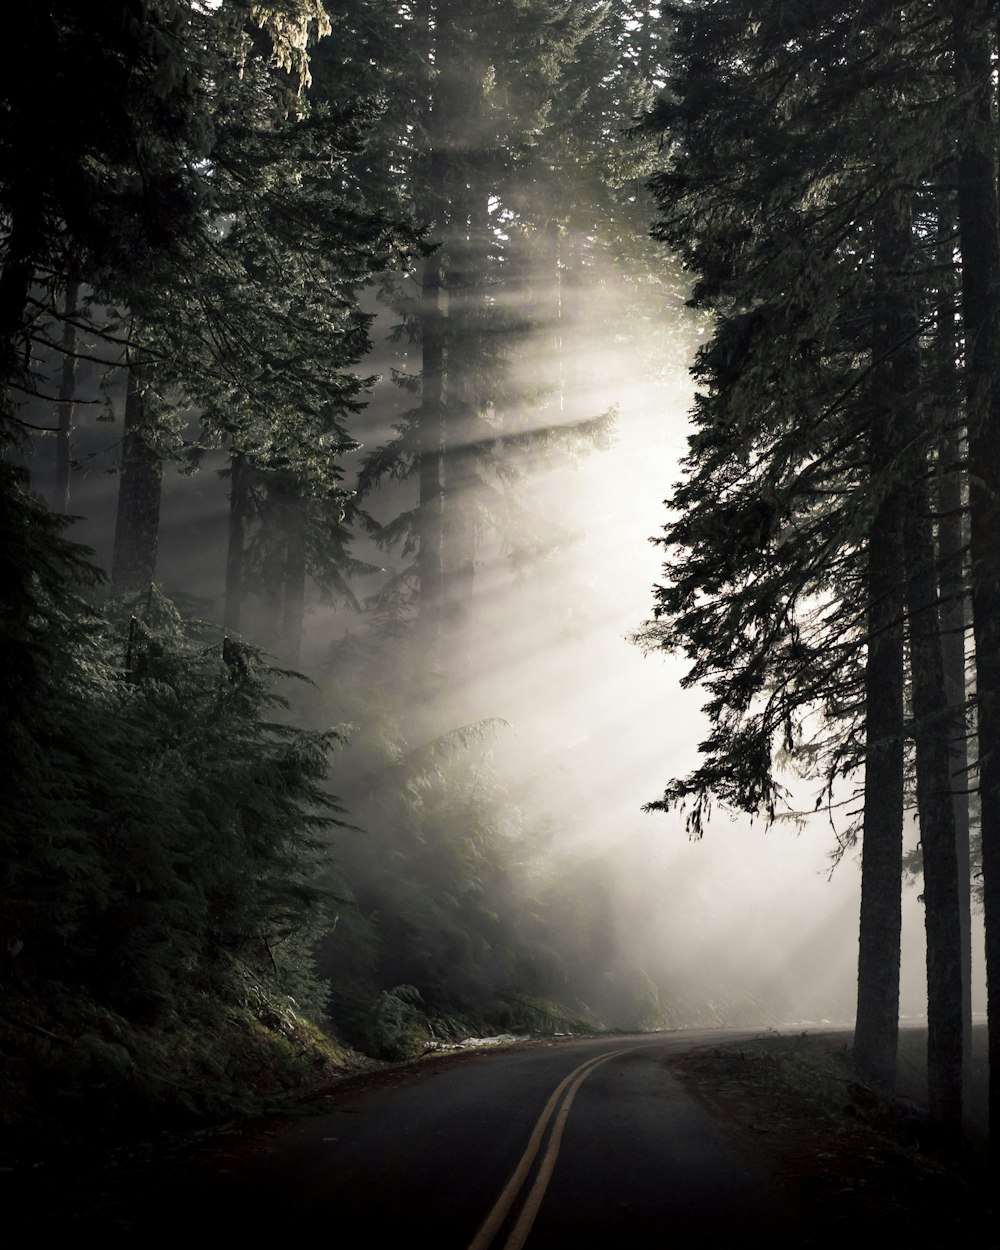 sunlight passing through thick woods along the winding road